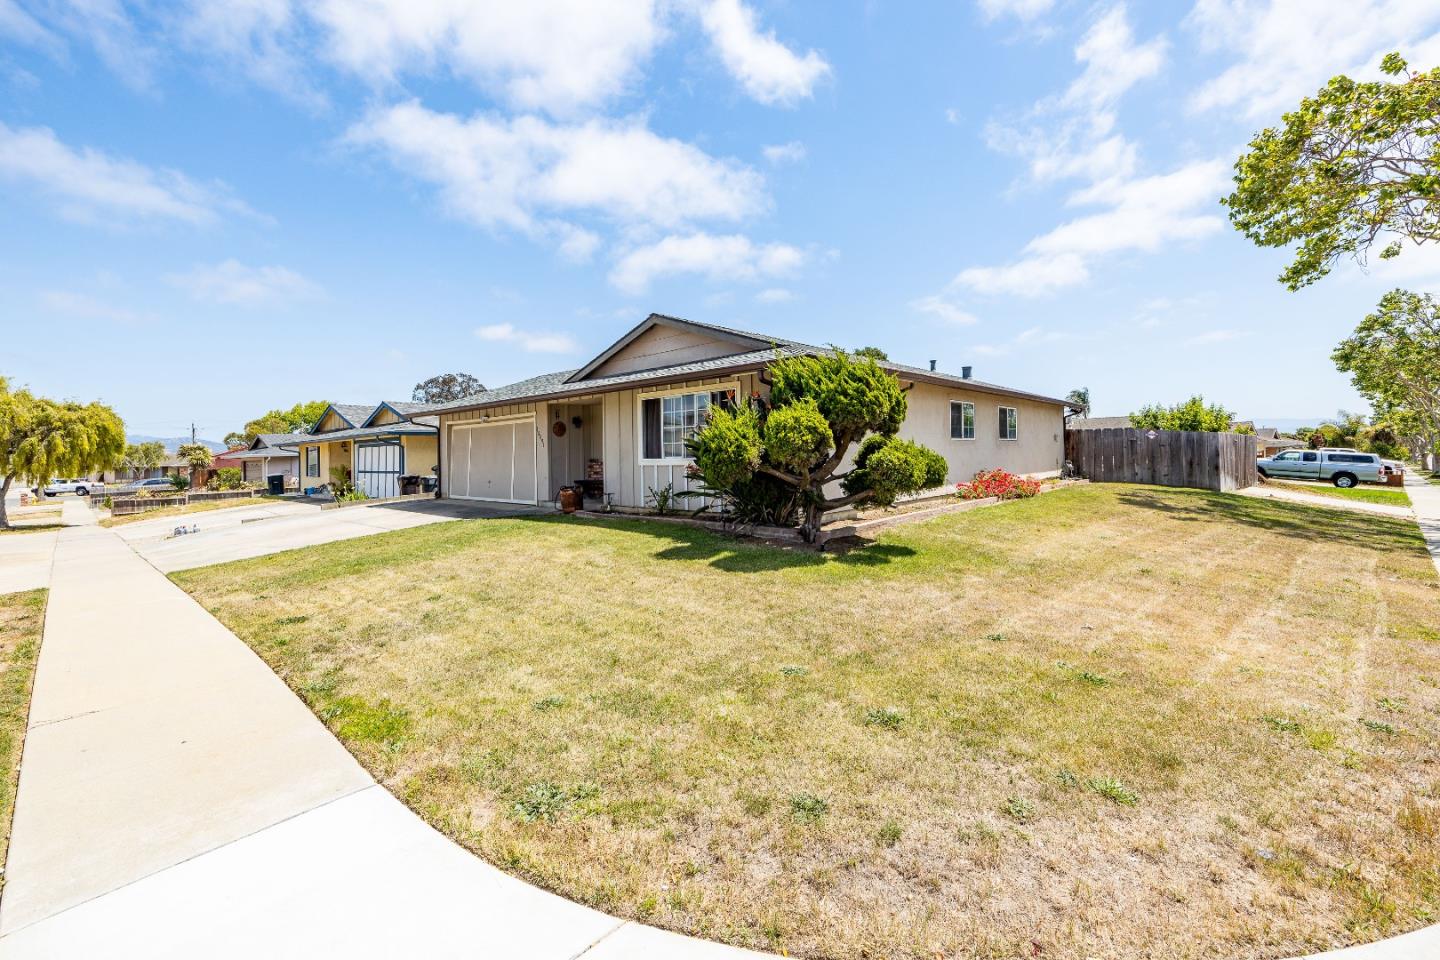 Detail Gallery Image 1 of 1 For 18892 Hoover St, Salinas,  CA 93906 - 4 Beds | 2 Baths